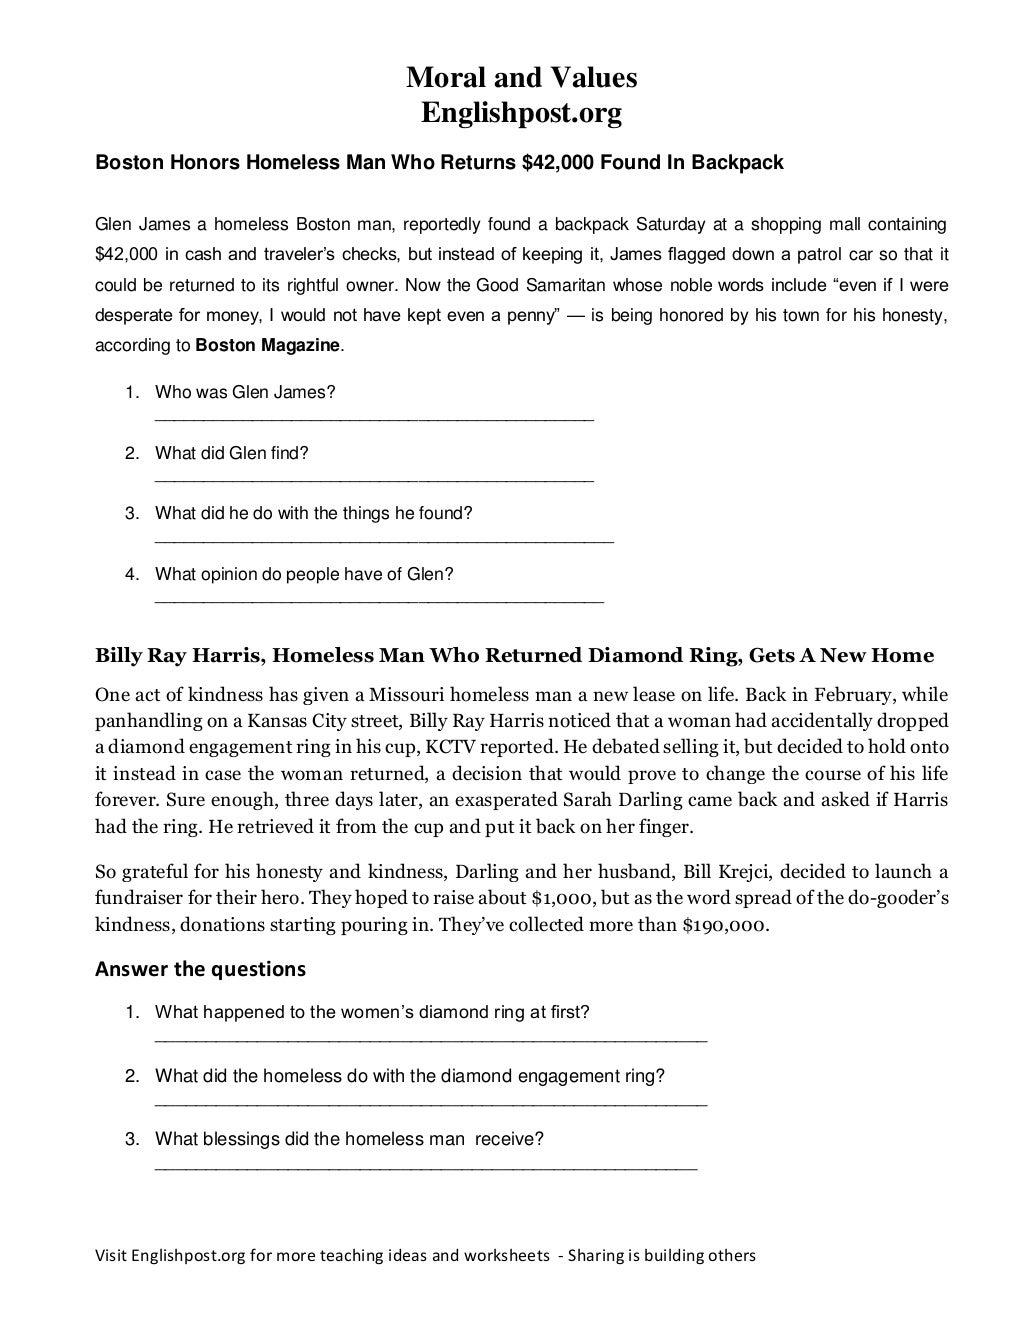 moral-and-values-worksheet-englishpost